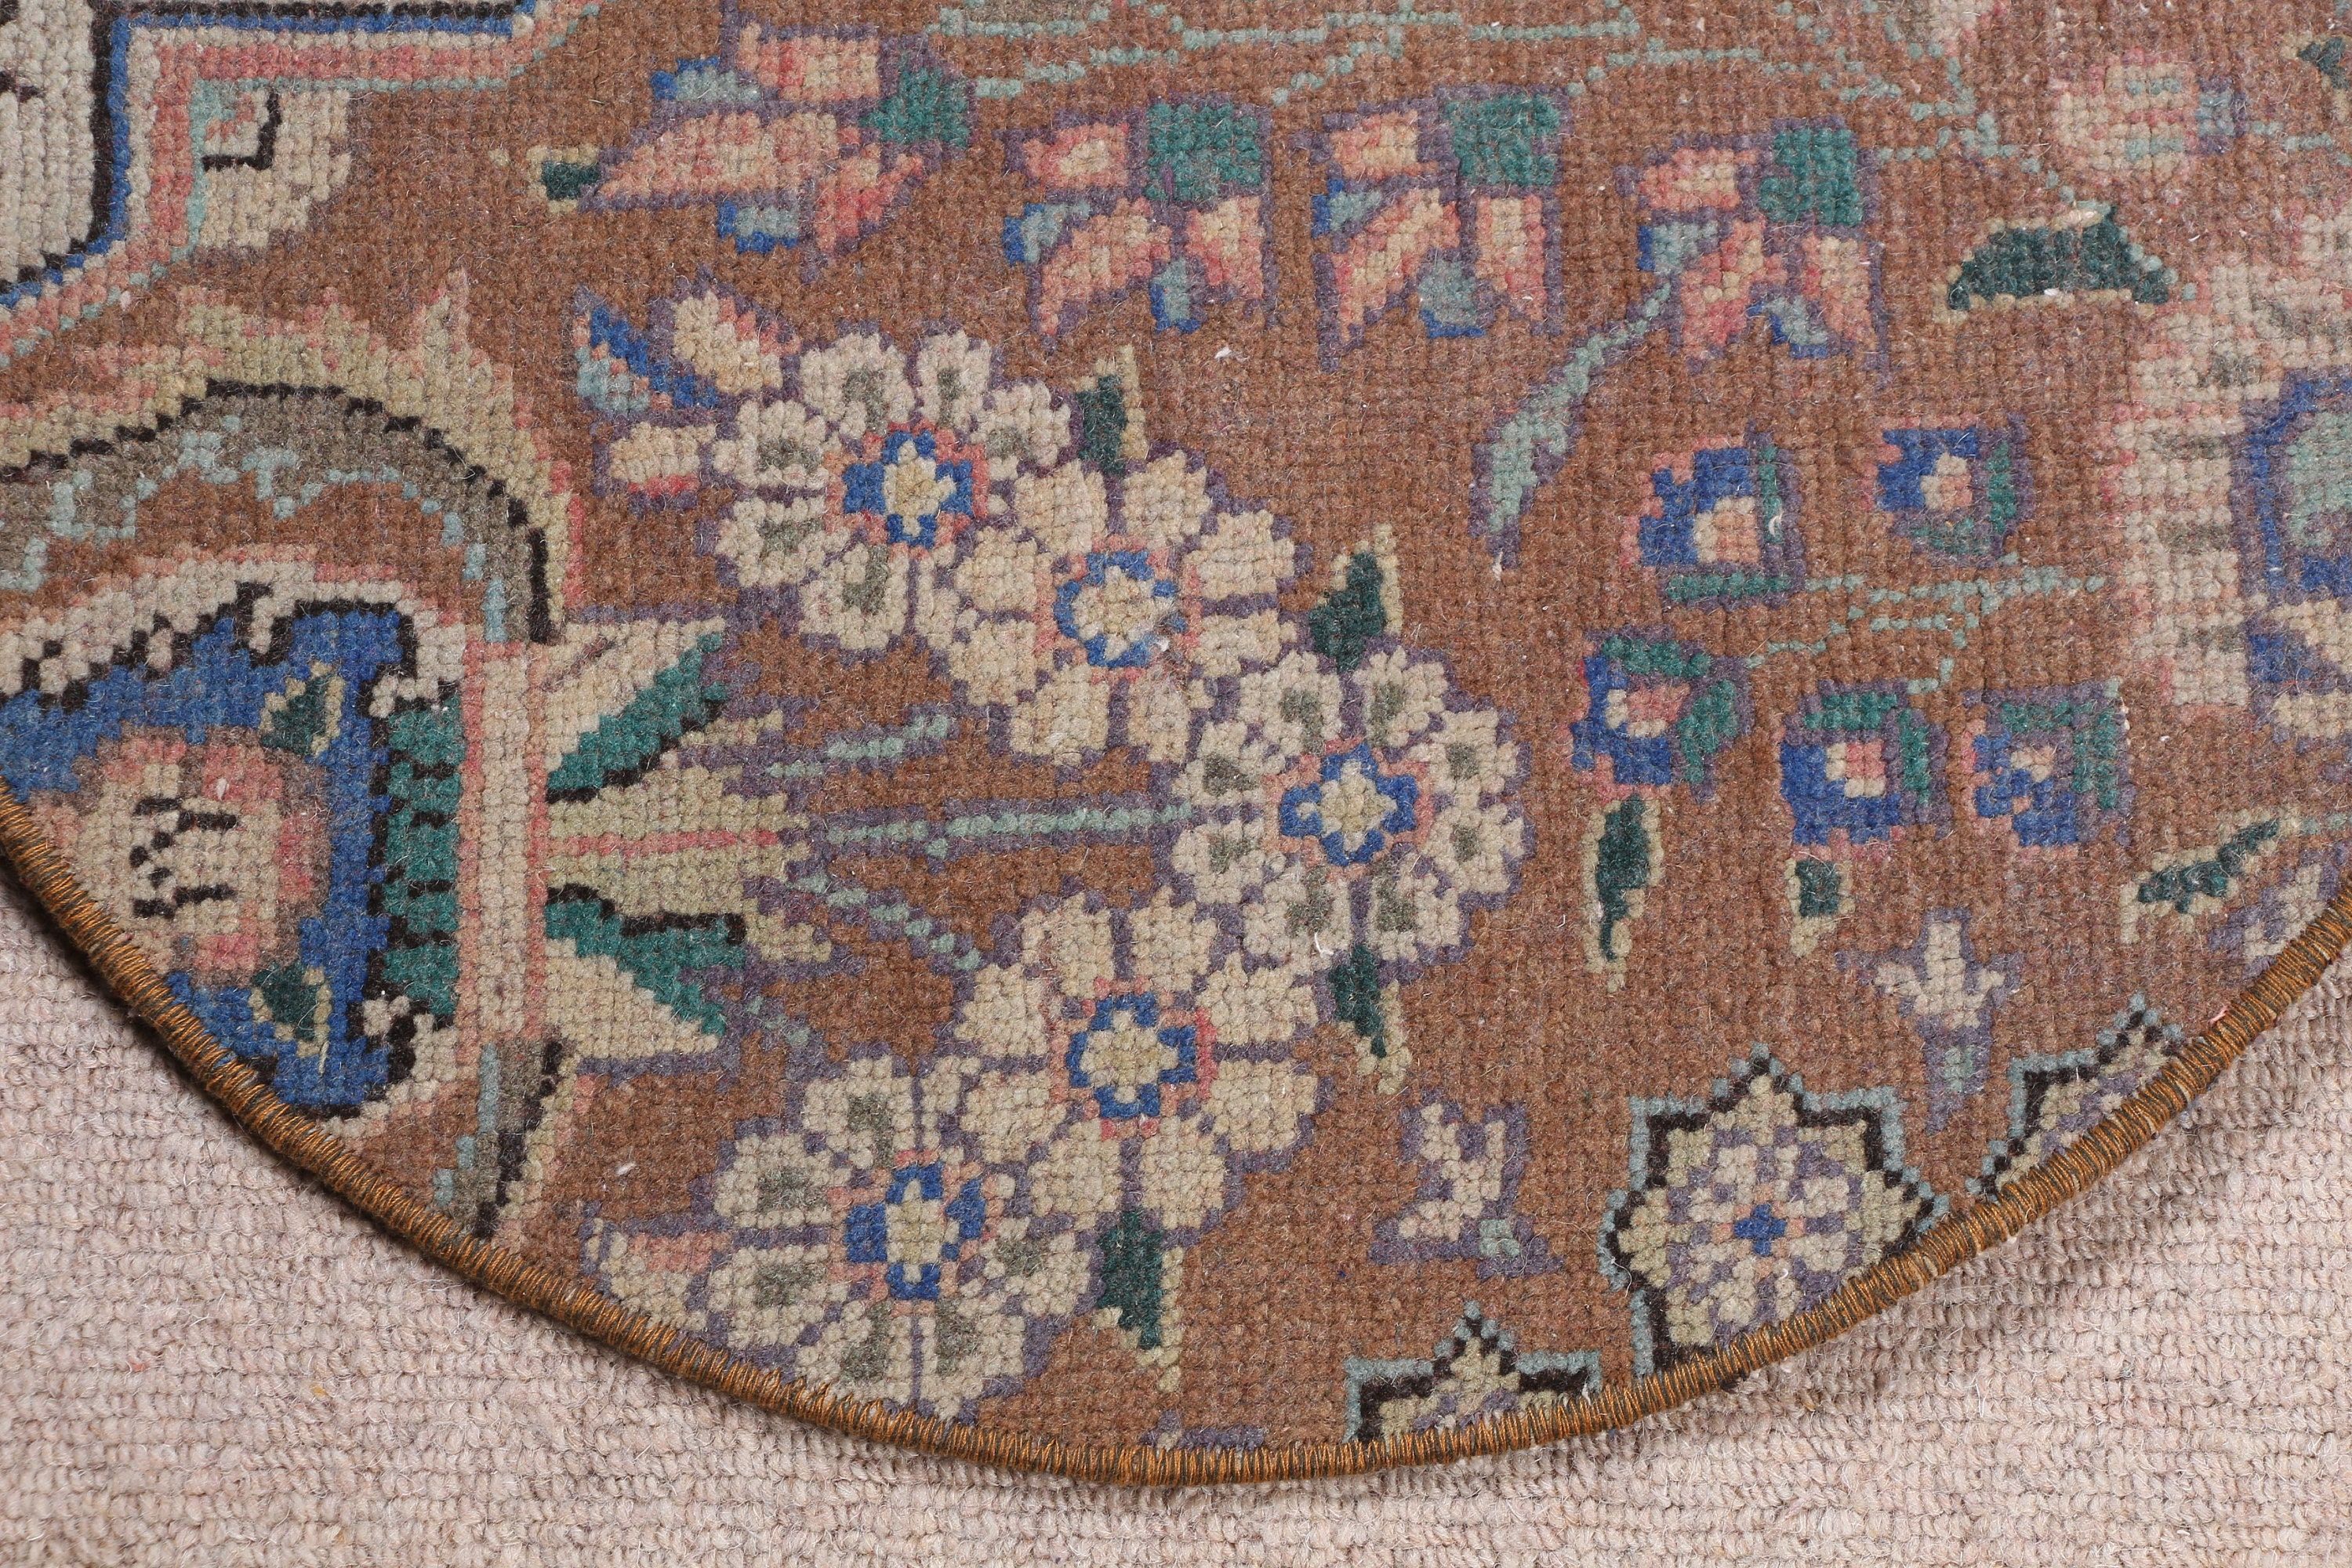 Vintage Rug, Door Mat Rug, 1.7x1.7 ft Small Rugs, Brown Oushak Rugs, Anatolian Rug, Rugs for Kitchen, Kitchen Rug, Turkish Rug, Entry Rugs